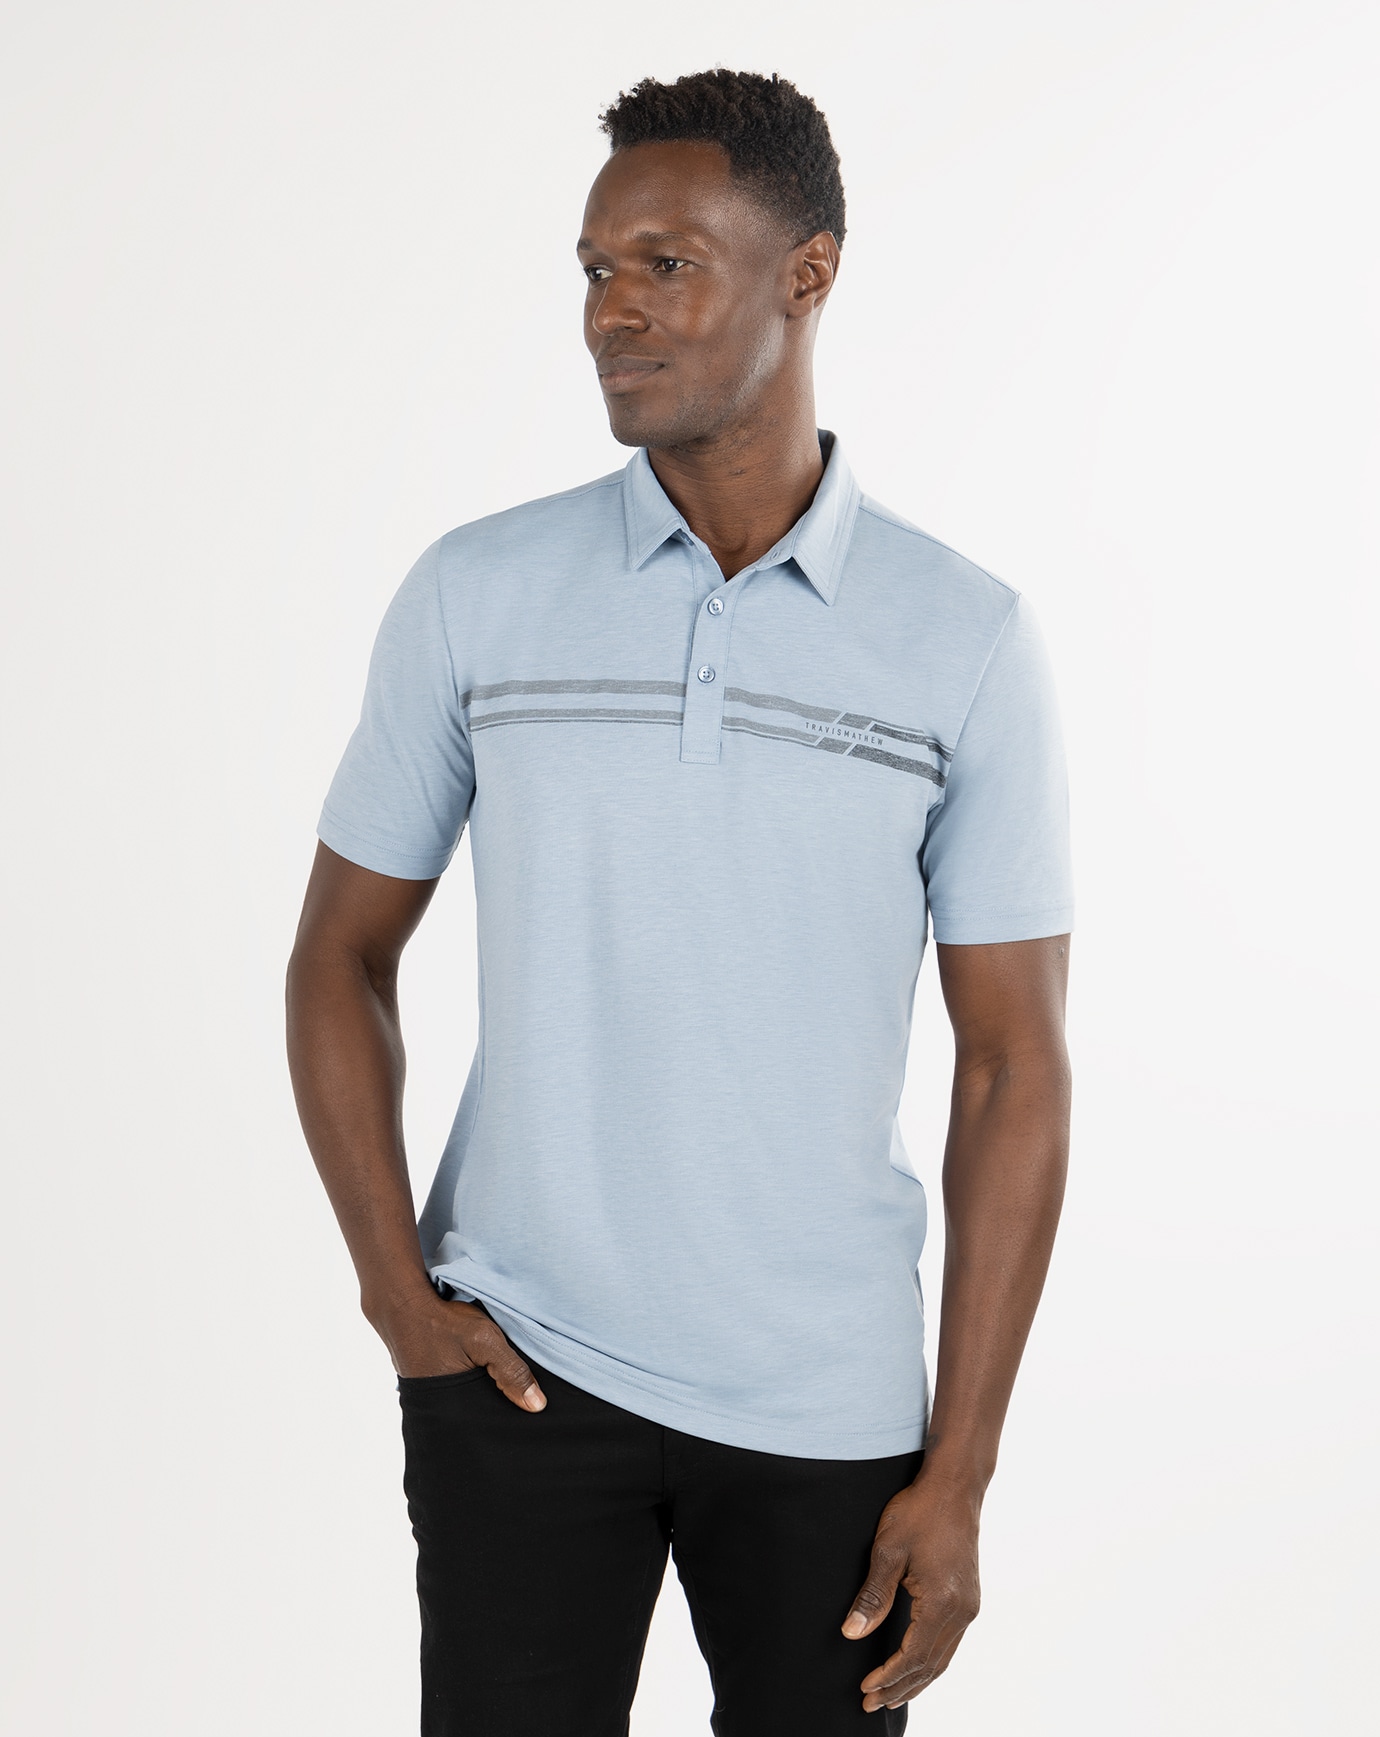 Related Product - DESERT DRIVE POLO